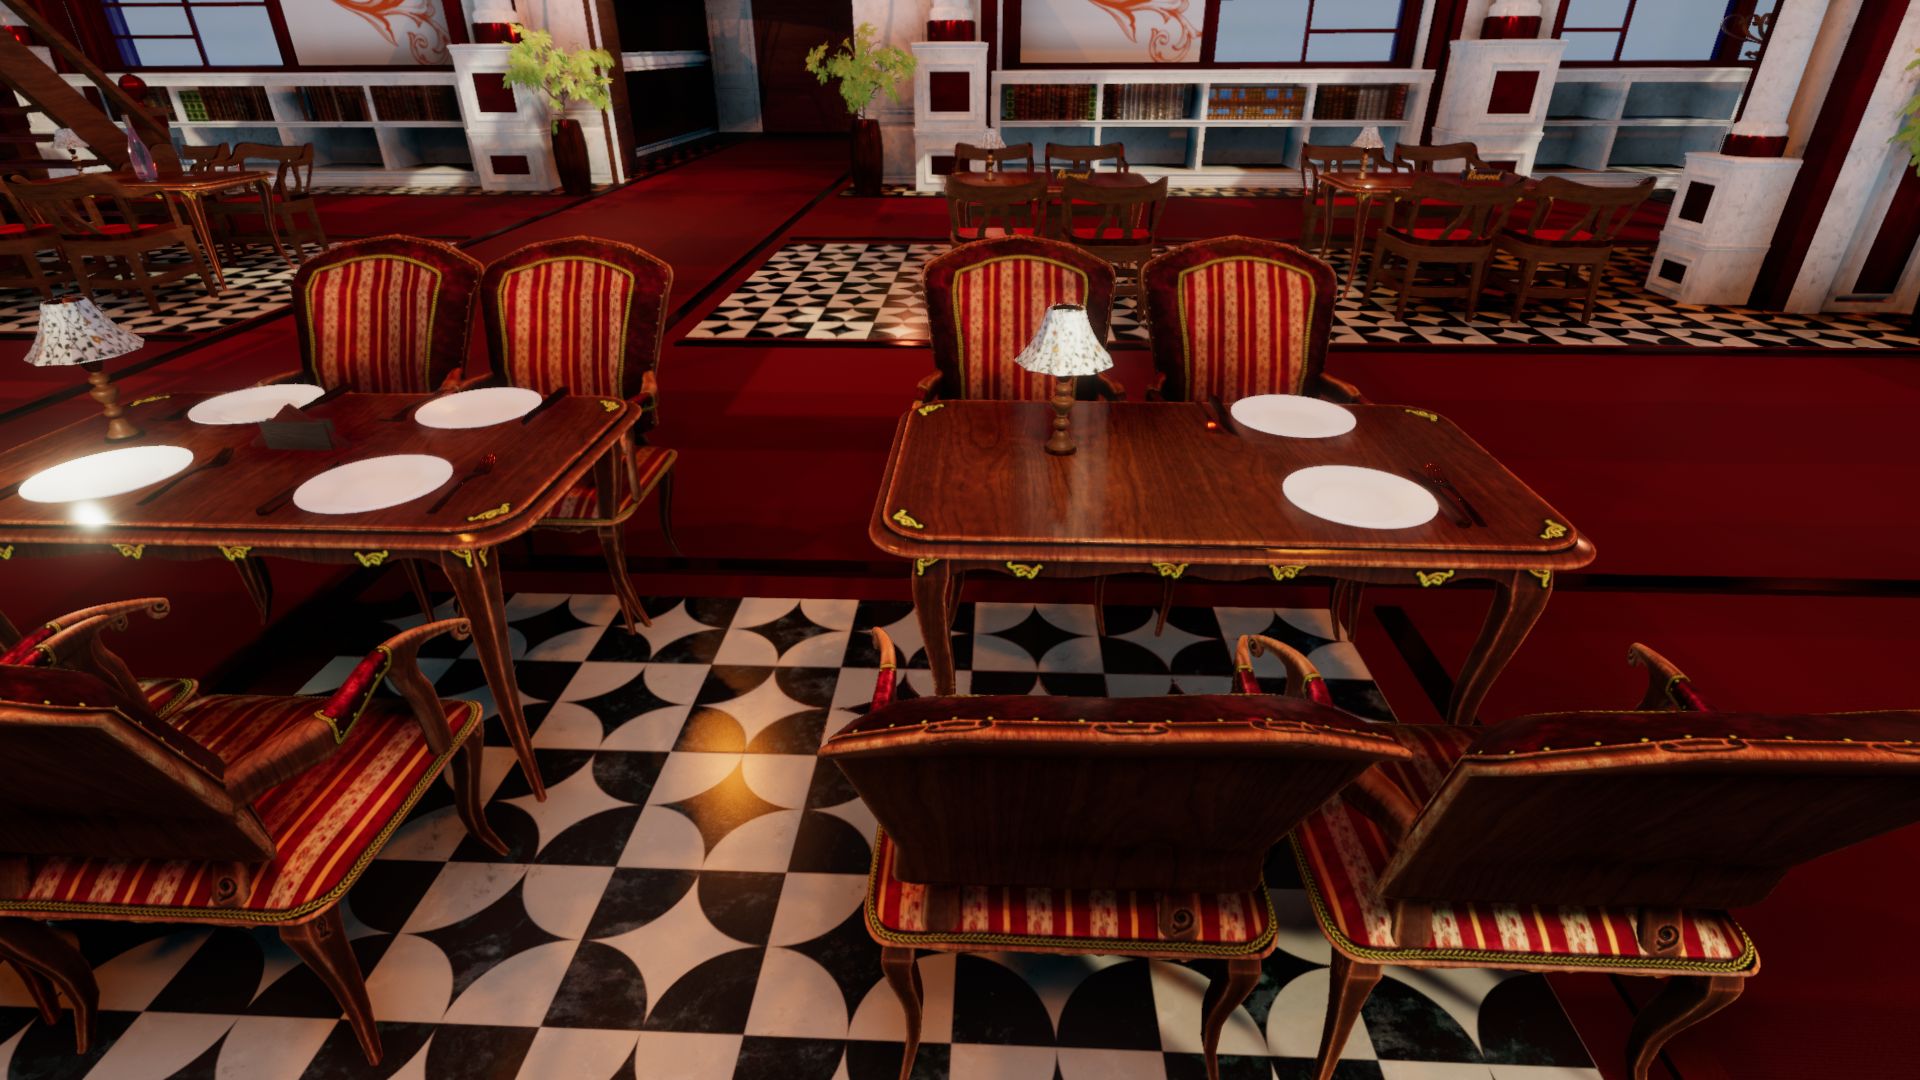 An image showing Restaurant Royale asset pack, created with Unity Engine.